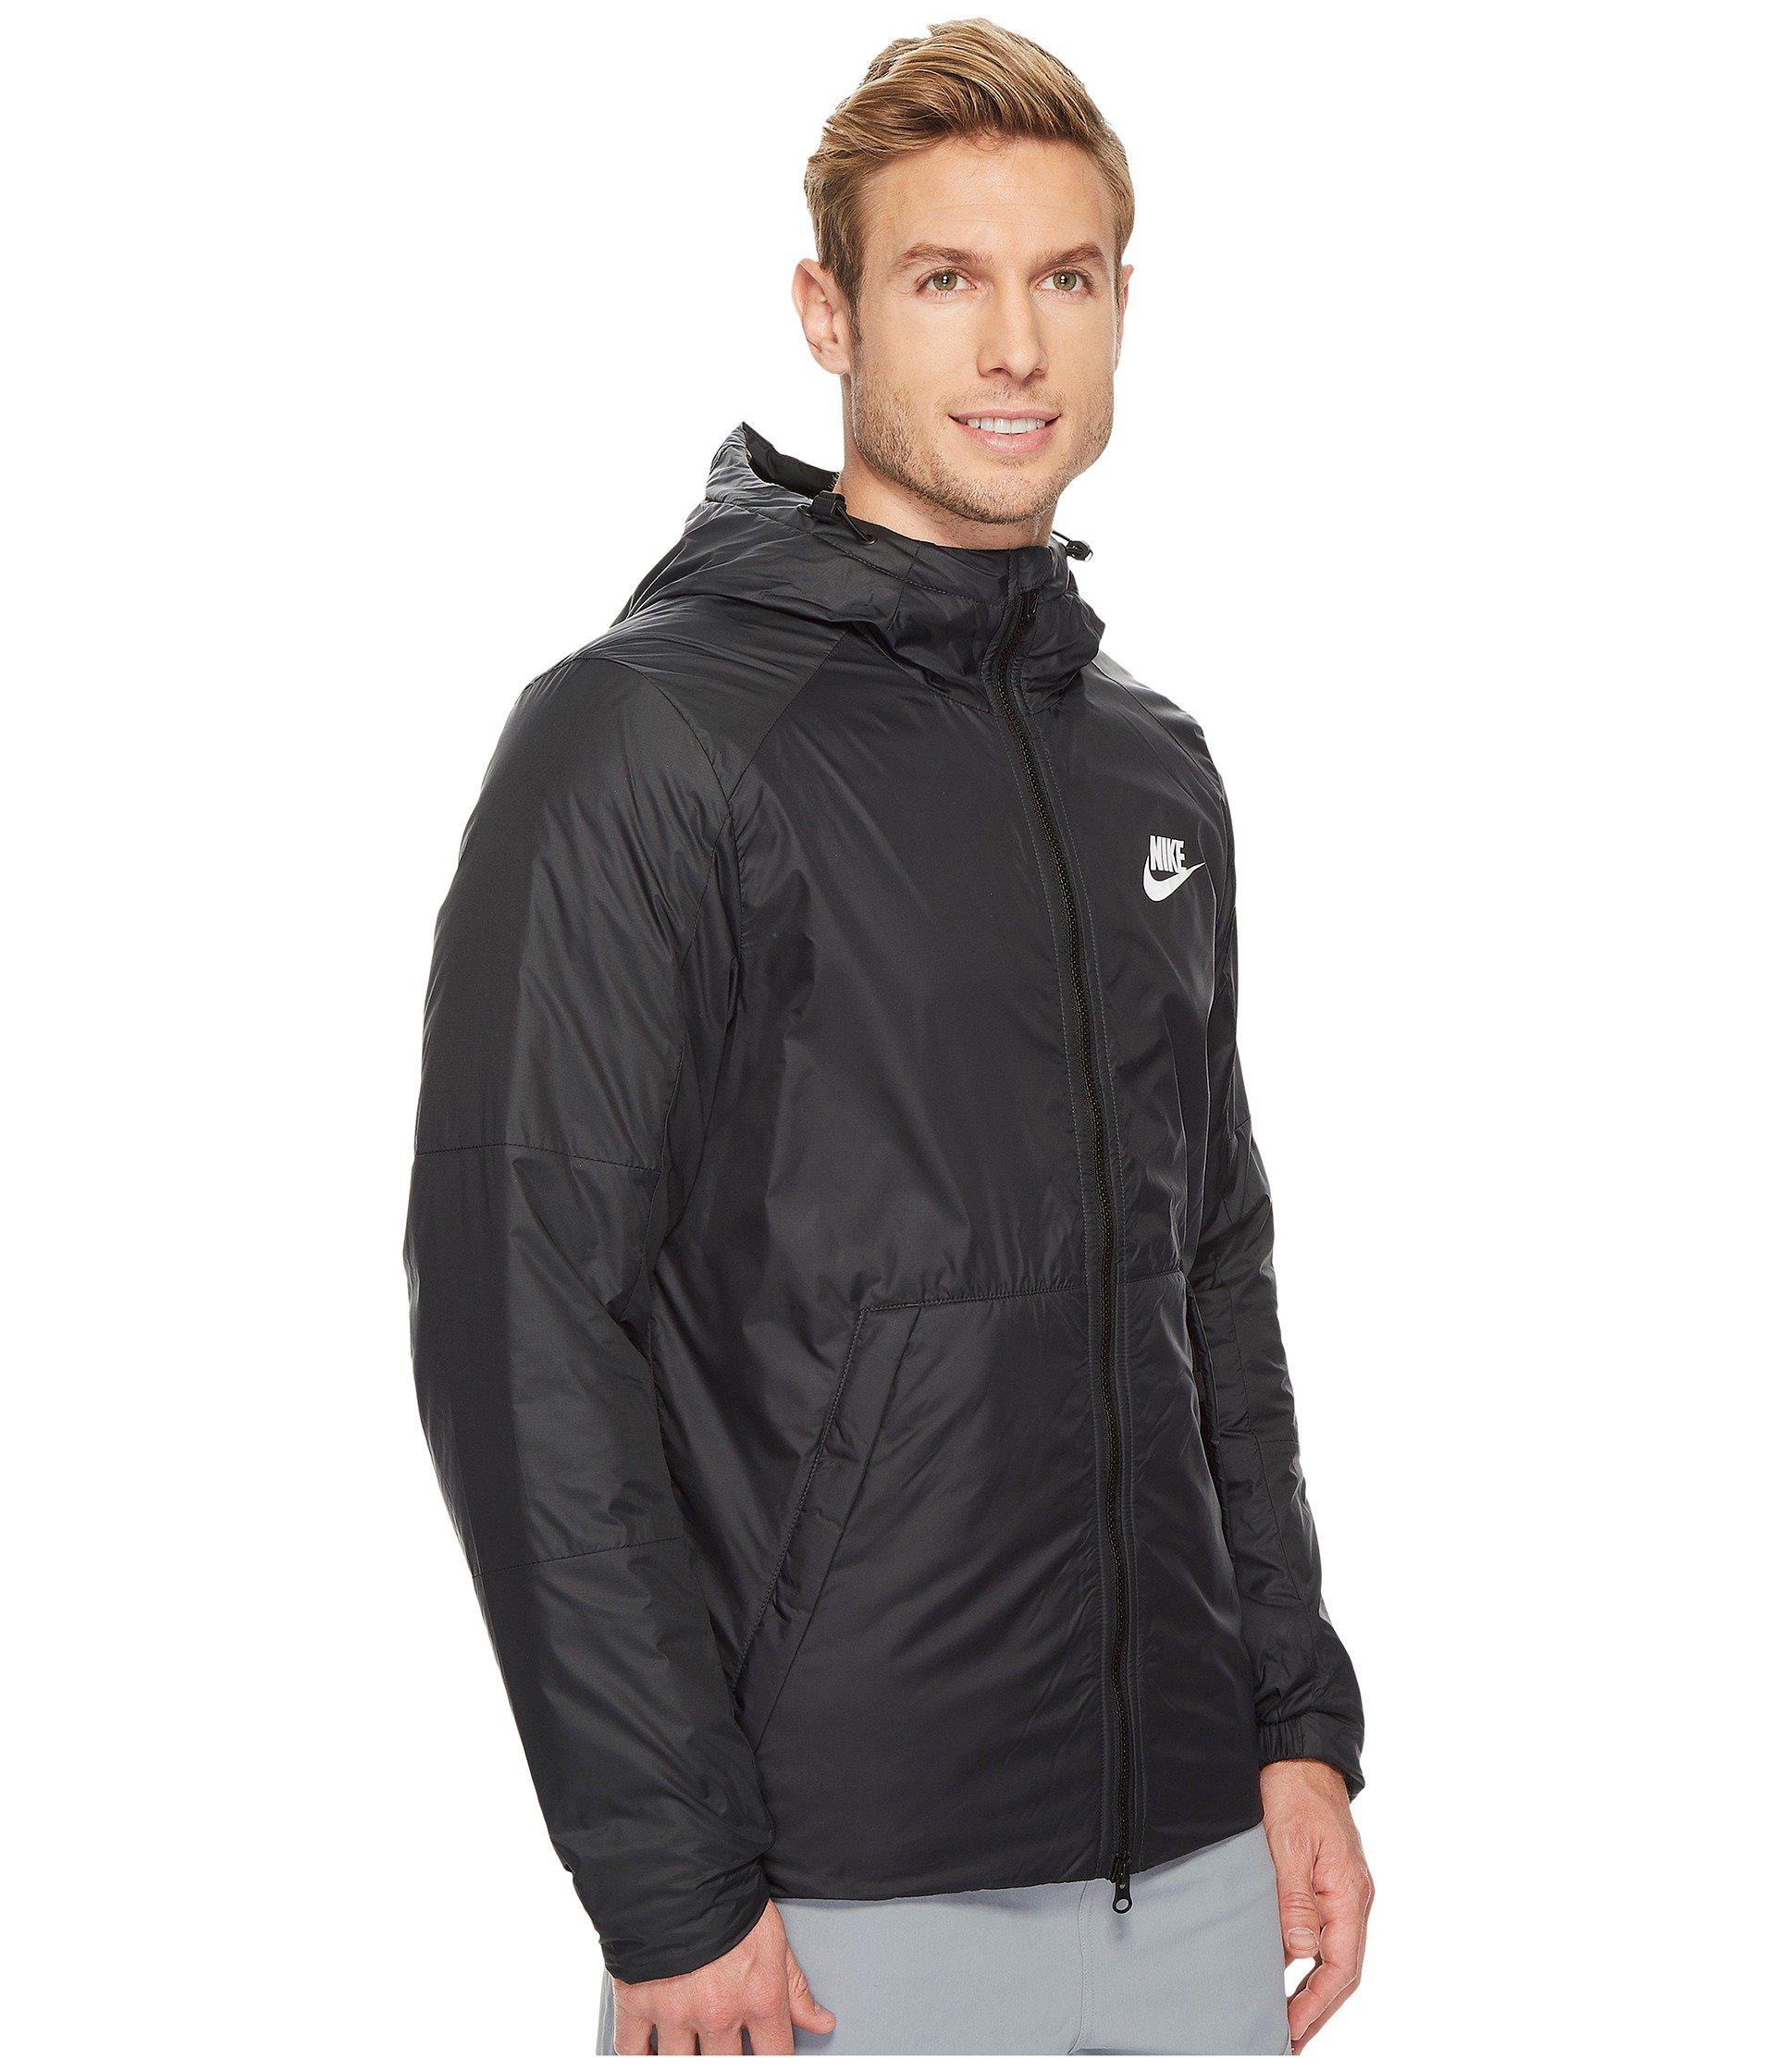 Nike Synthetic Fill Fleece Jacket in Black/Anthracite/White (Black) for ...